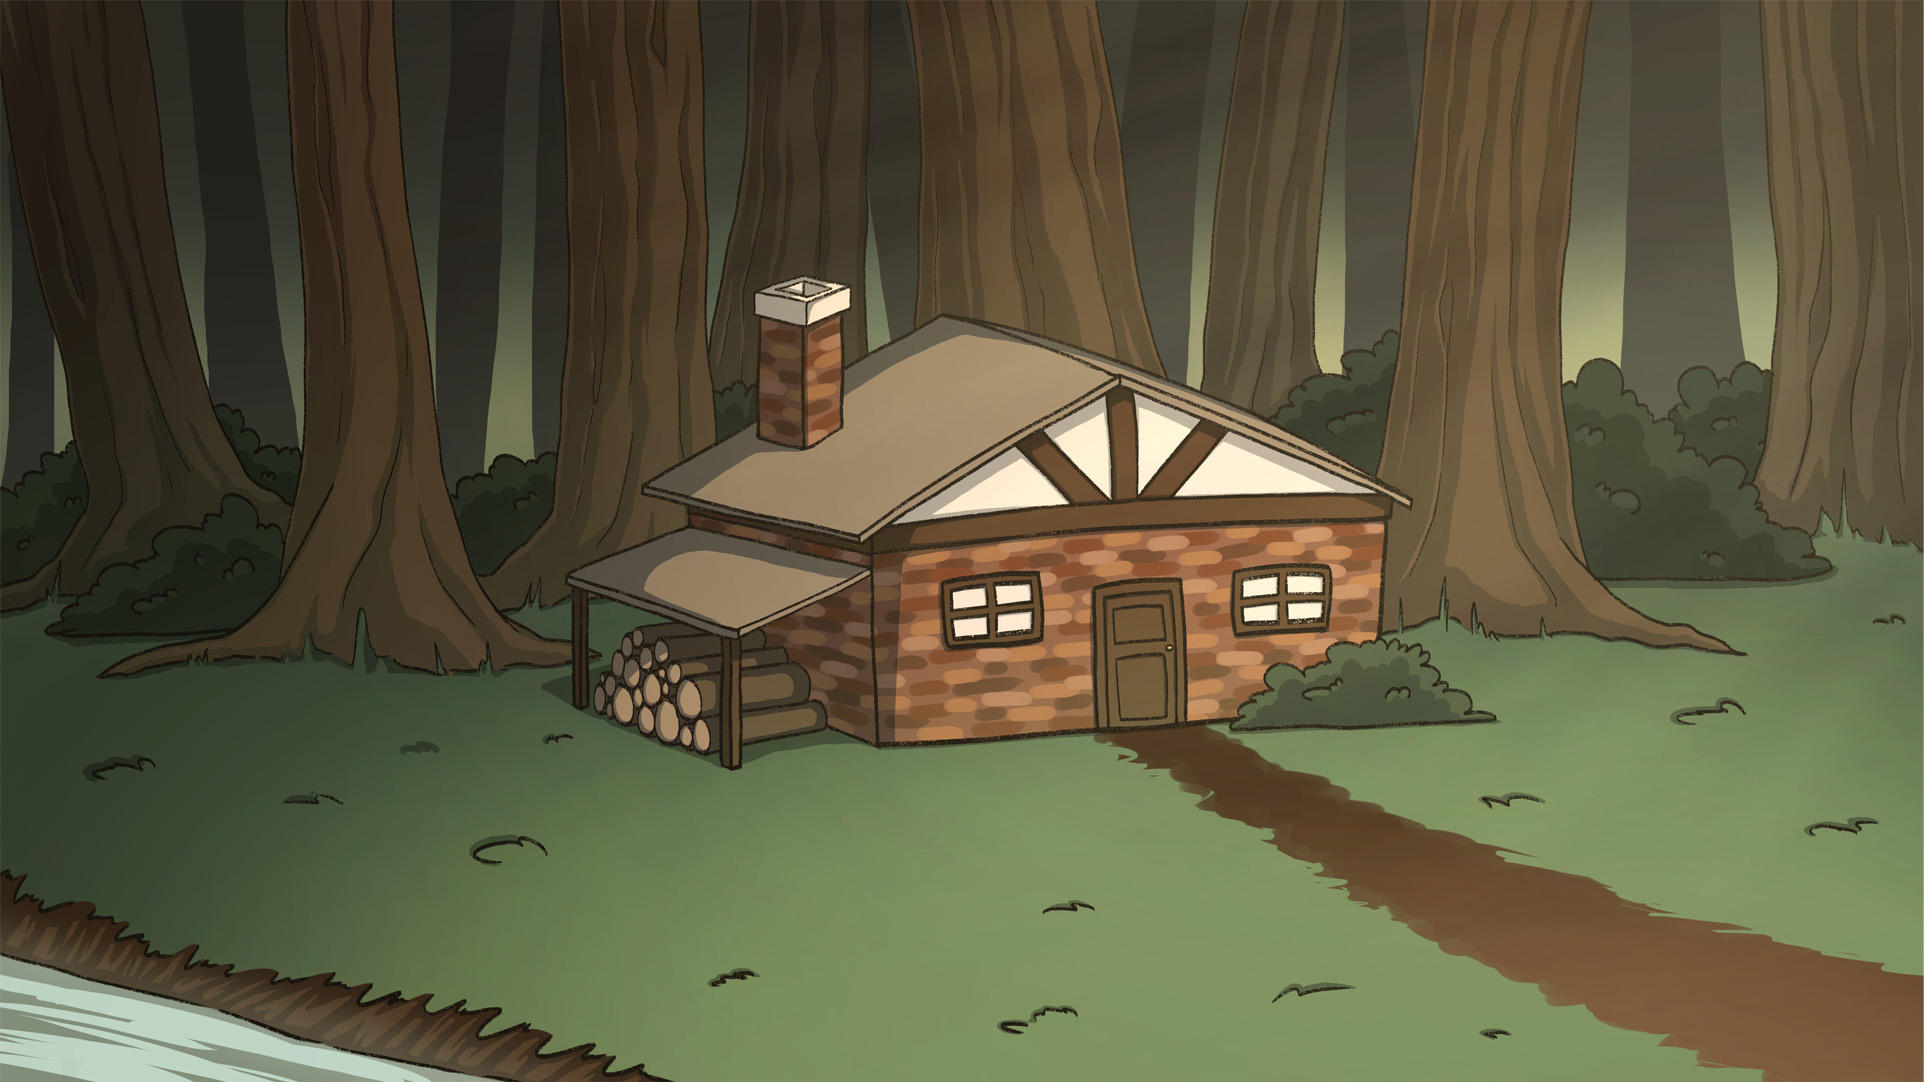  / Still of character Phoenix's home from "one more day', a 4-and-a-half-minute short 16:9 HD animation created using Clip Studio Paint EX and DaVinci Resolve